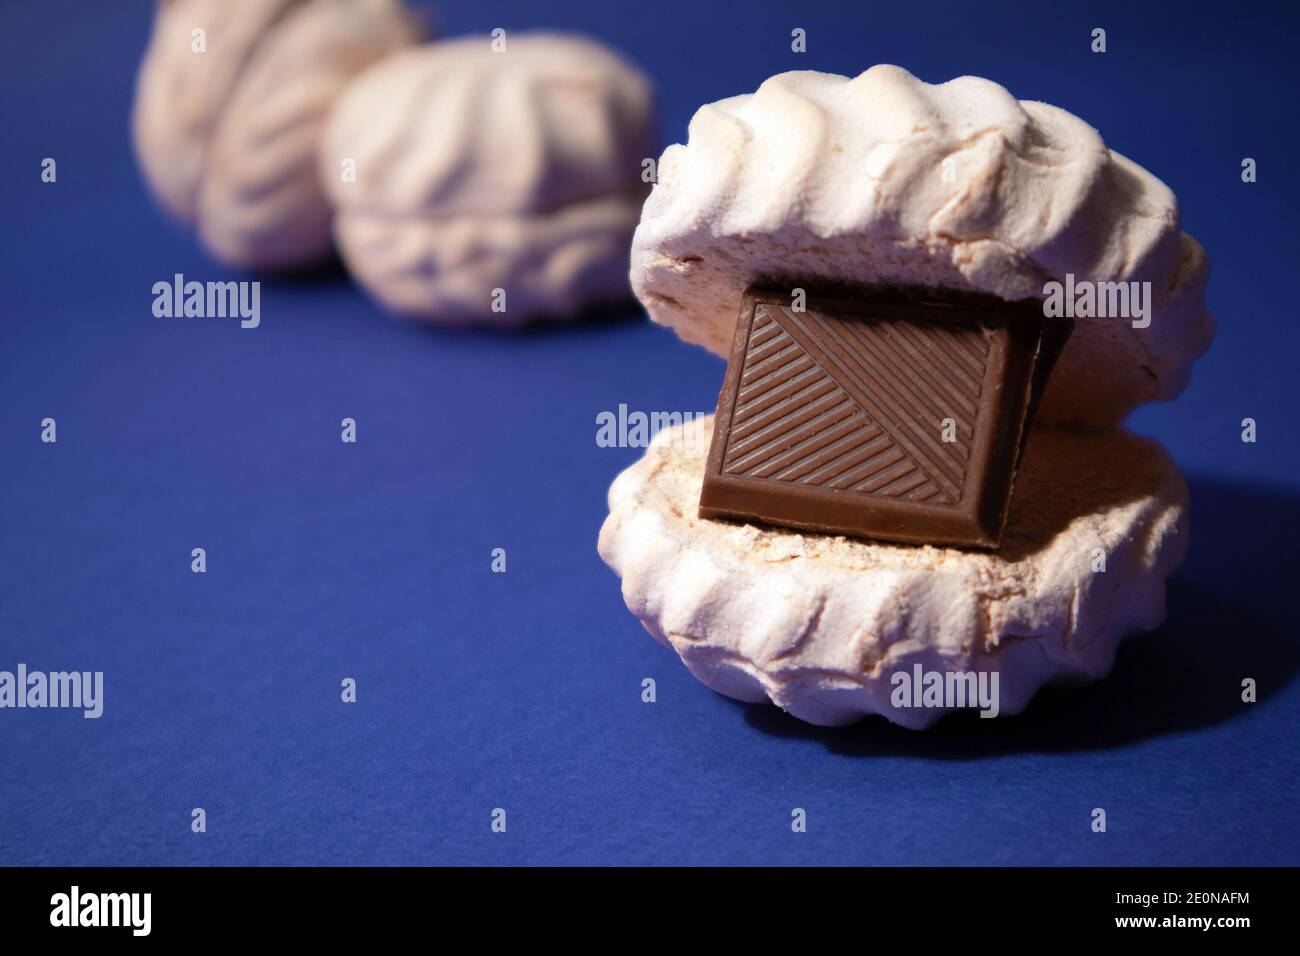 White zephyr with tile of dark chocolate inside against trendy blue background Stock Photo